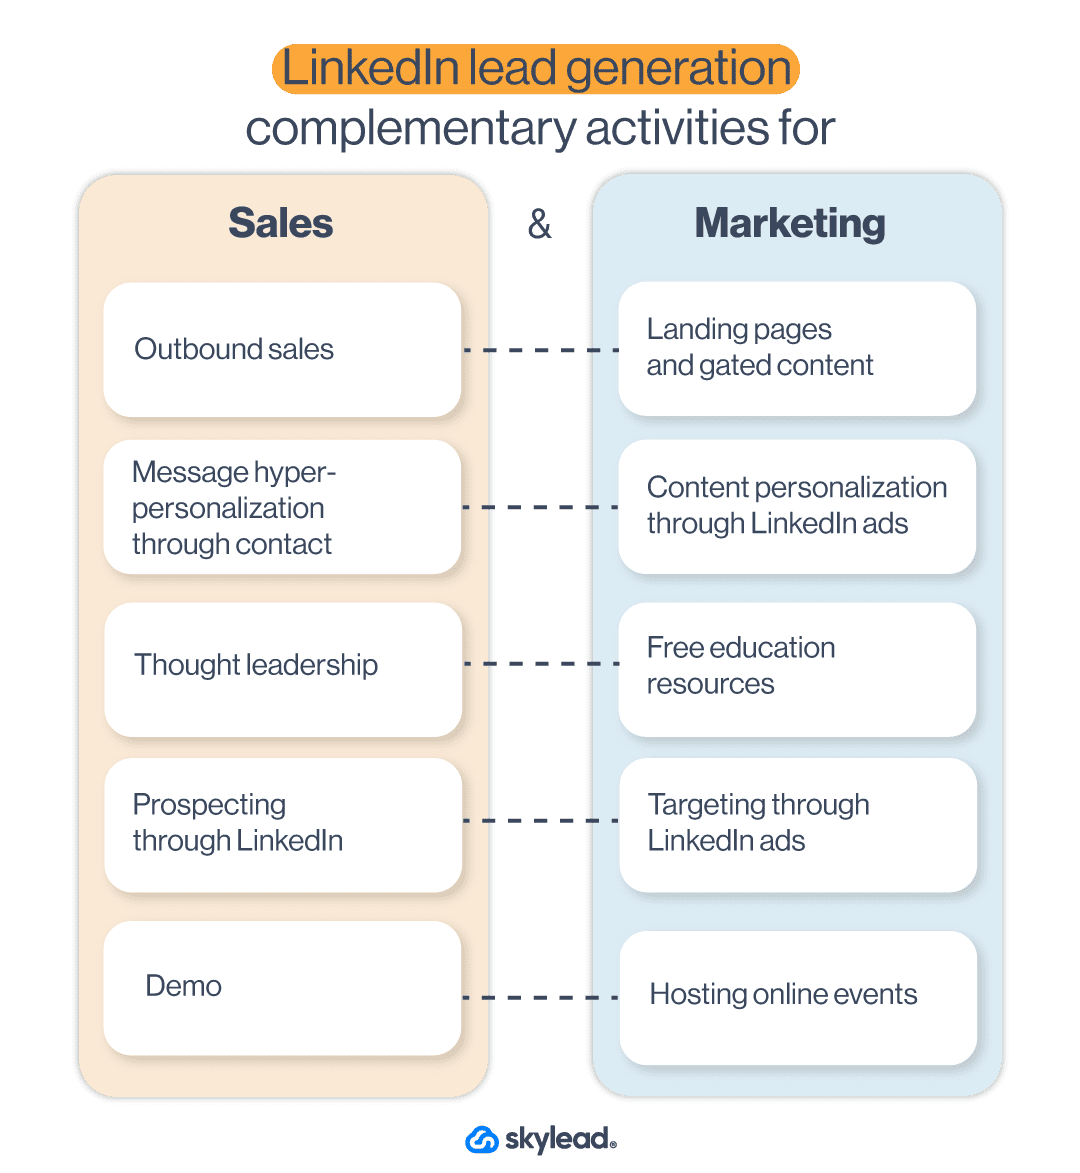 LinkedIn lead generation strategy to align sales and marketing activities